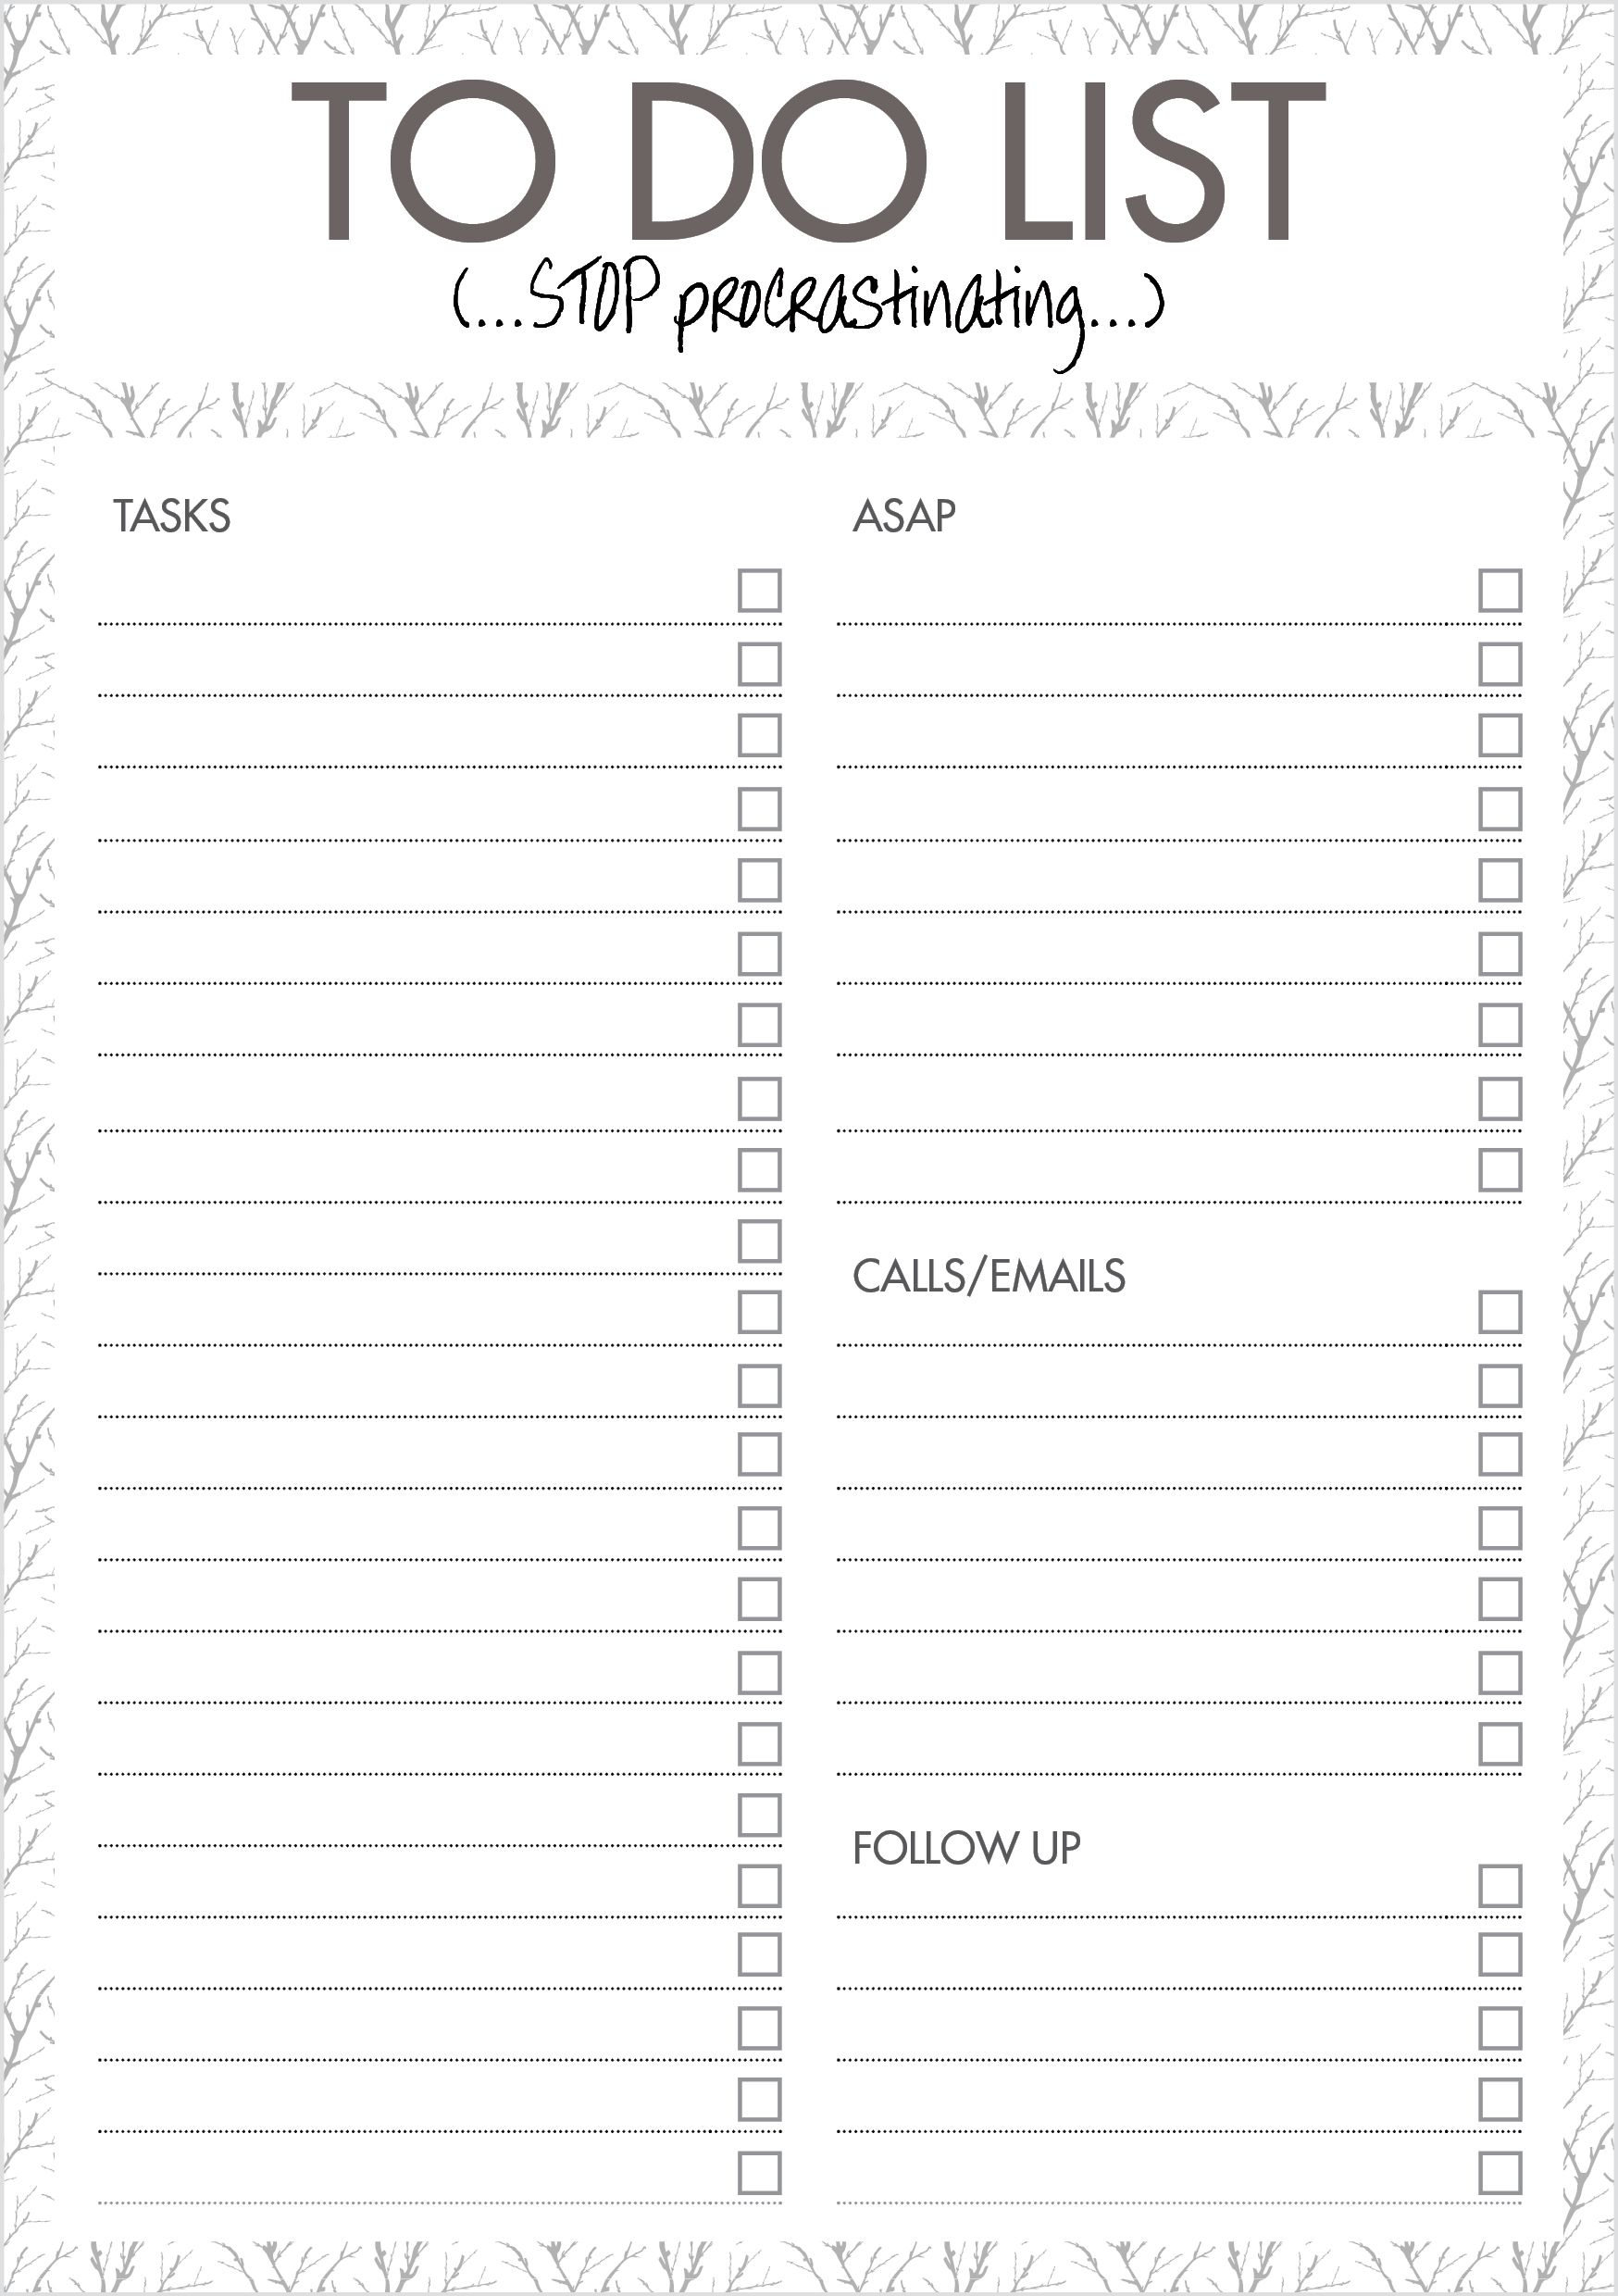 Best To Do List Template To Do List Template Rochelle Stone 